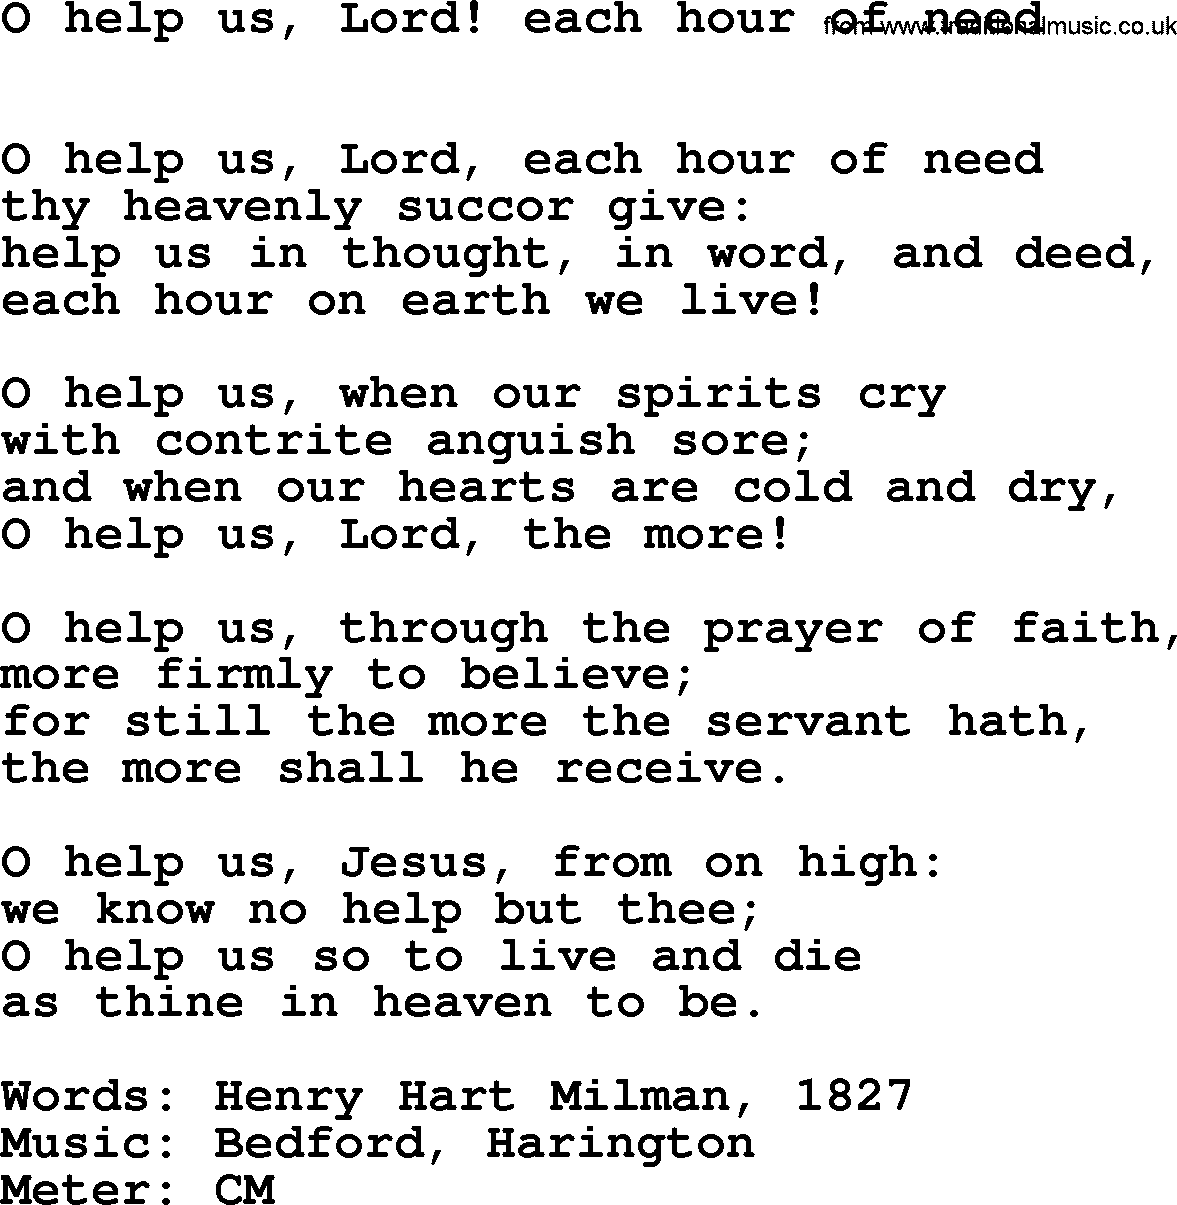 Book of Common Praise Hymn: O Help Us, Lord! Each Hour Of Need.txt lyrics with midi music